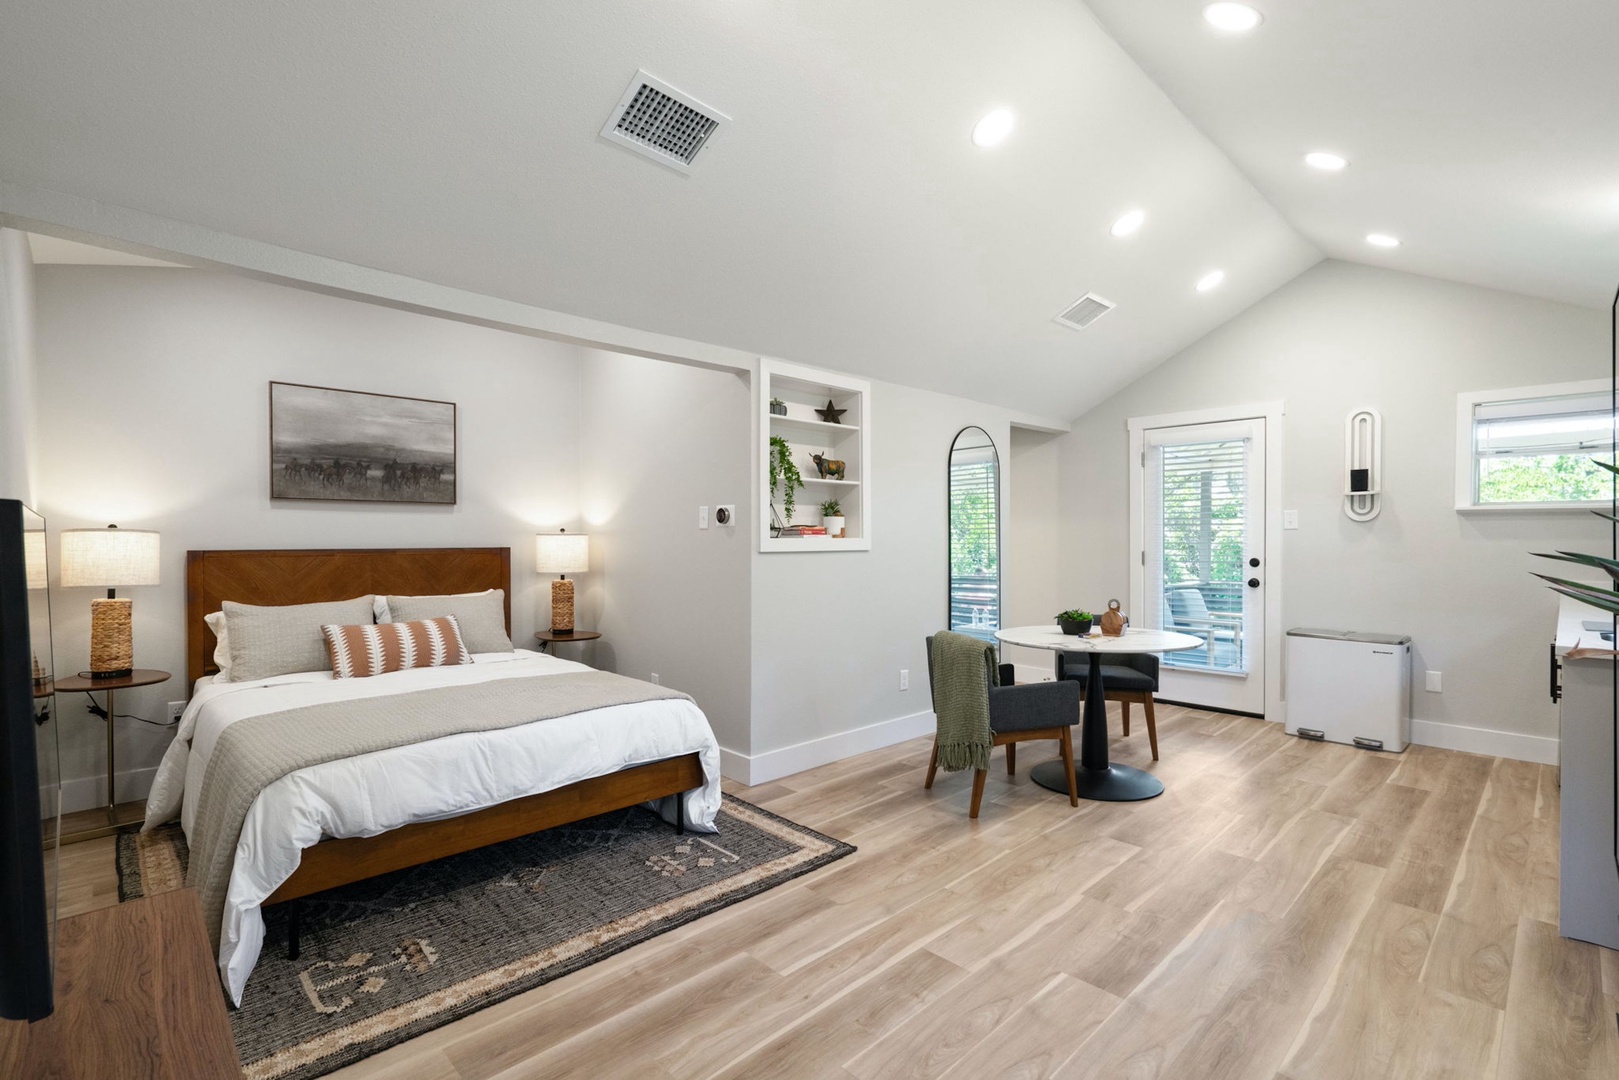 Enjoy the open, airy layout of the Studio’s bedroom & living spaces